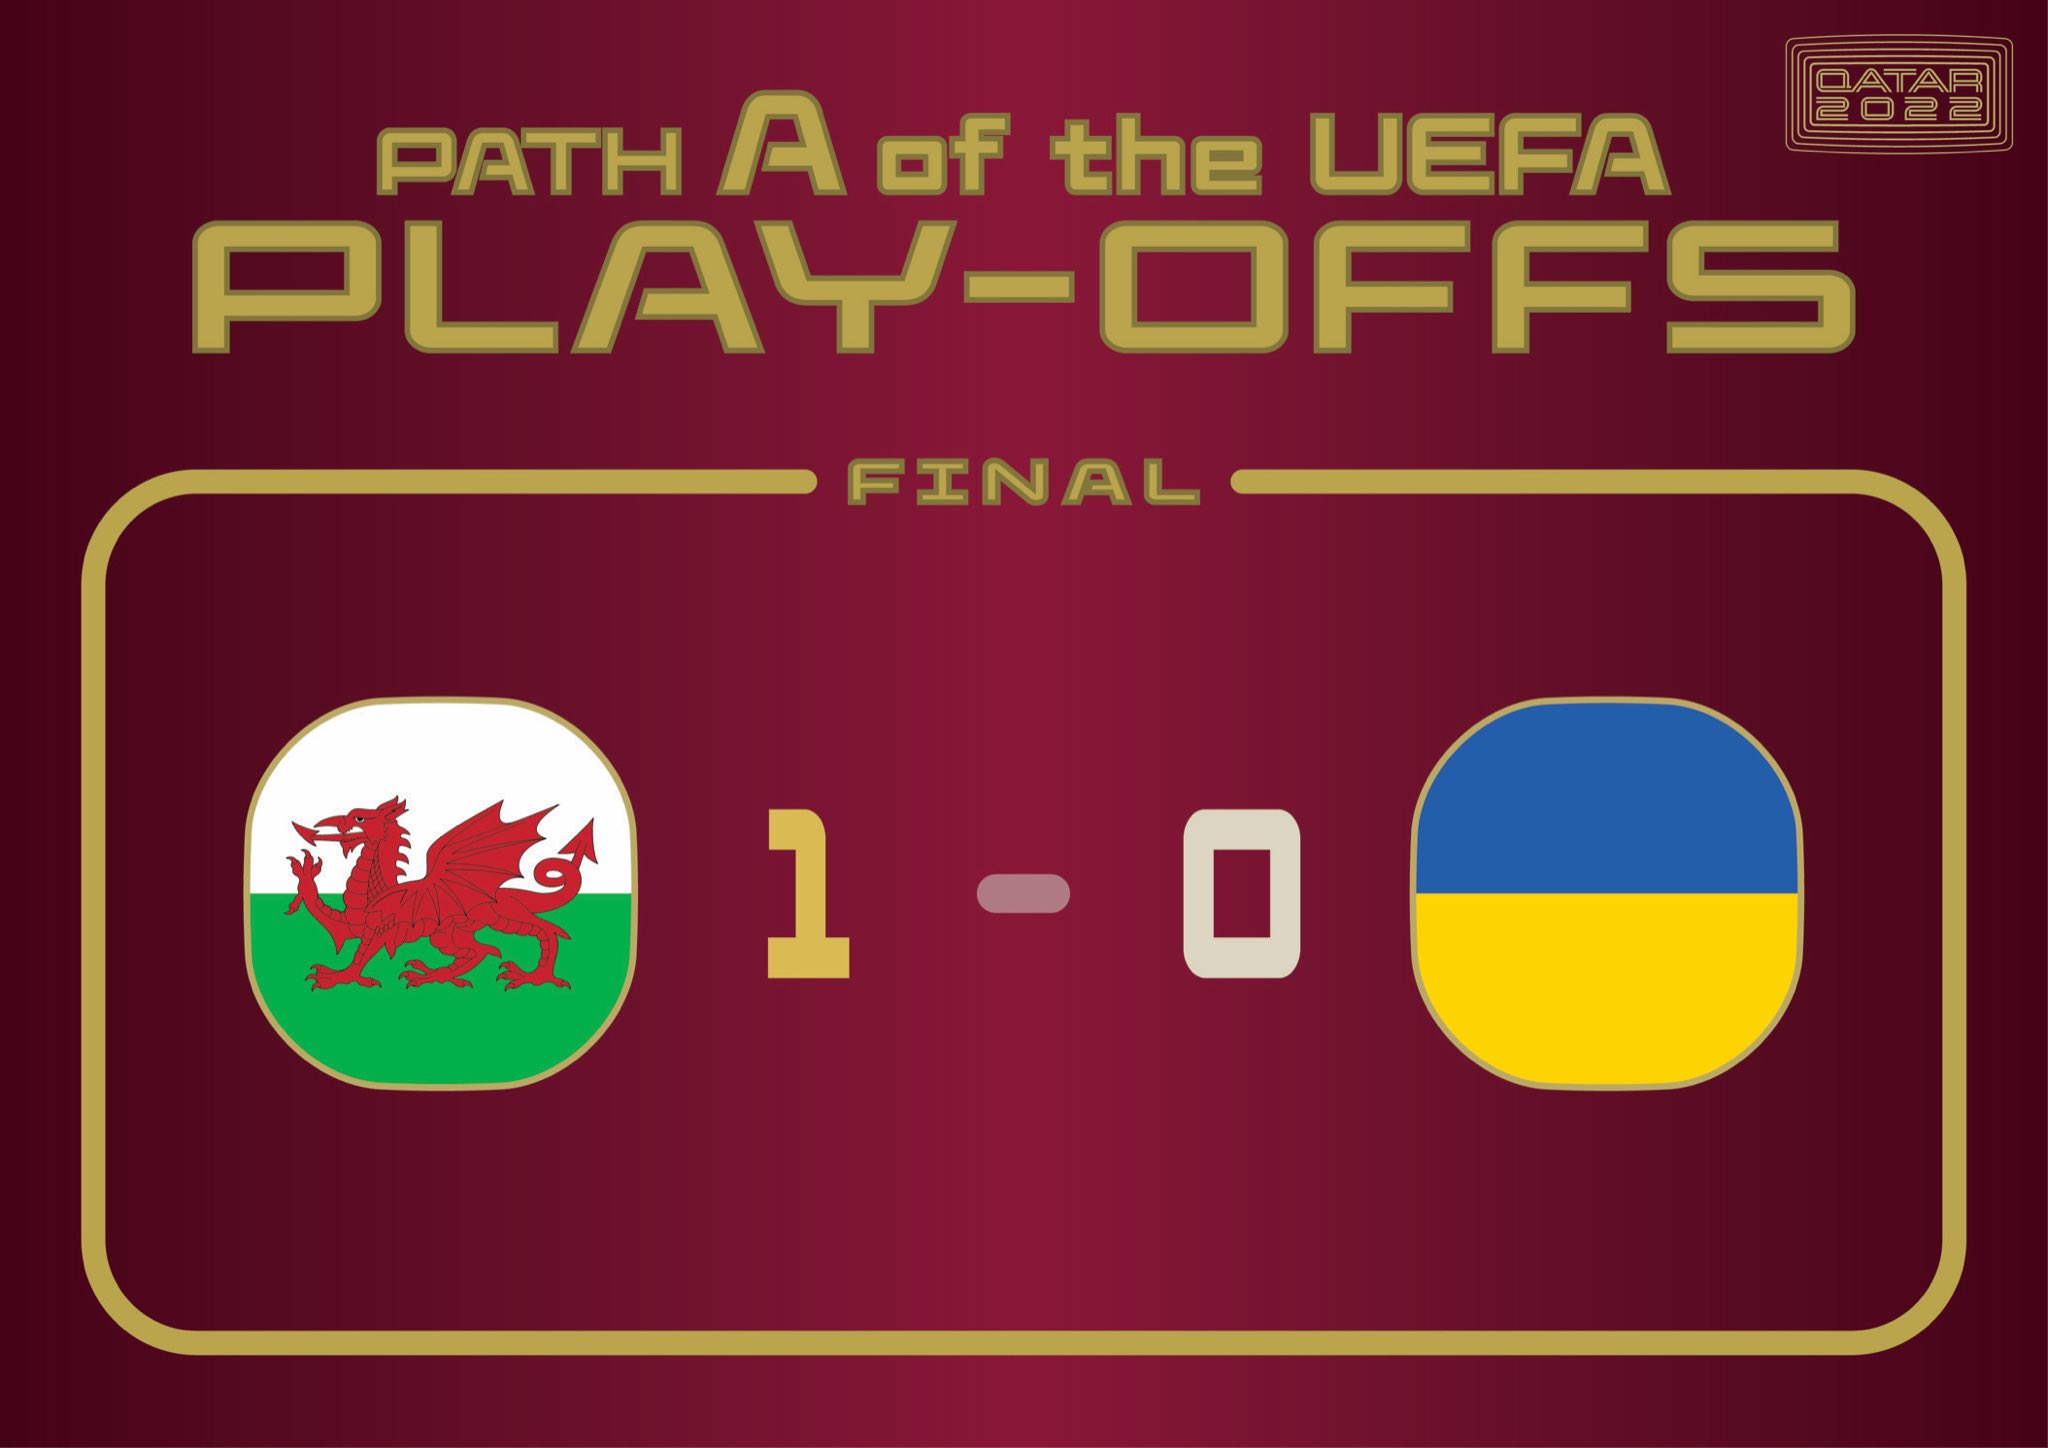 Football Score From Japan Qatar22 Match Results Path A Of The Uefa Play Offs Final V 試合結果 Uefa プレーオフ パスa 決勝 Worldcup22 Worldcup カタール W杯 ワールドカップ Football サッカー T Co